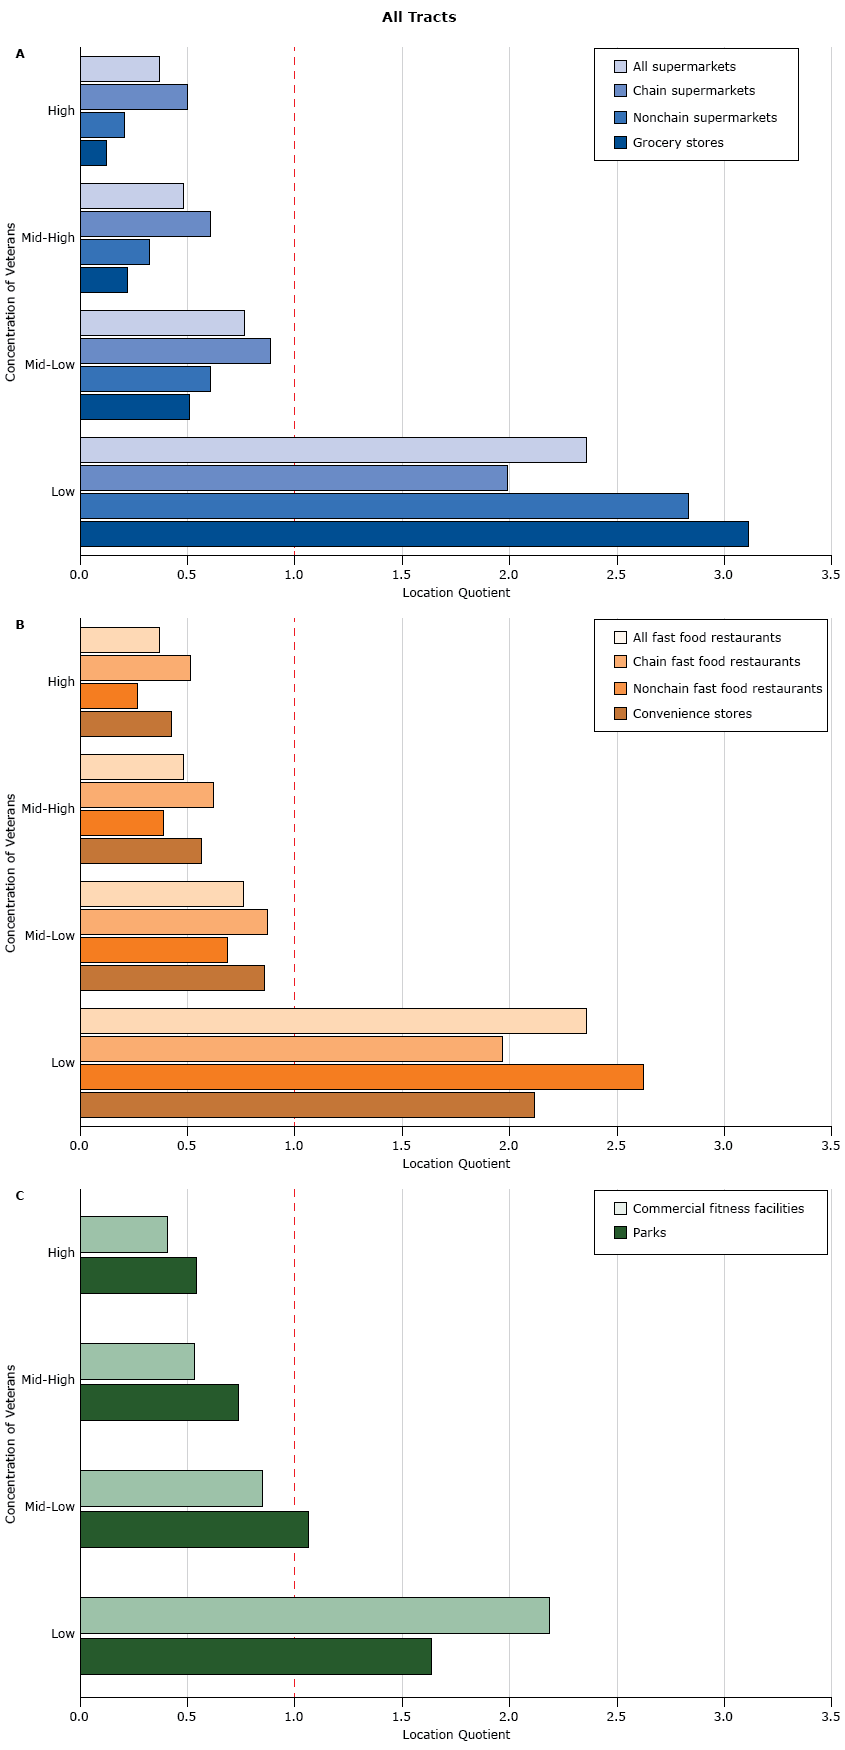  Availability of food and recreational venues in census tracts, by quartile of concentration of veterans (the percentage of veterans among the adult population), relative to all US census tracts, as measured by the location quotient. The greater the location quotient, the greater the availability of a food or recreational venue relative to all locations in a sample. A location quotient equal to 1.0 (indicated by the red dashed line) indicates that availability in sample is equal to availability across all US census tracts: A) supermarkets and grocery stores, B) fast food restaurants and convenience stores, and C) recreational venues. Quartiles of veteran concentration were categorized as low (0%–6.0%), mid-low (6.0%–8.8%), mid-high (8.8%–11.5%), and high (11.5%–100%). 